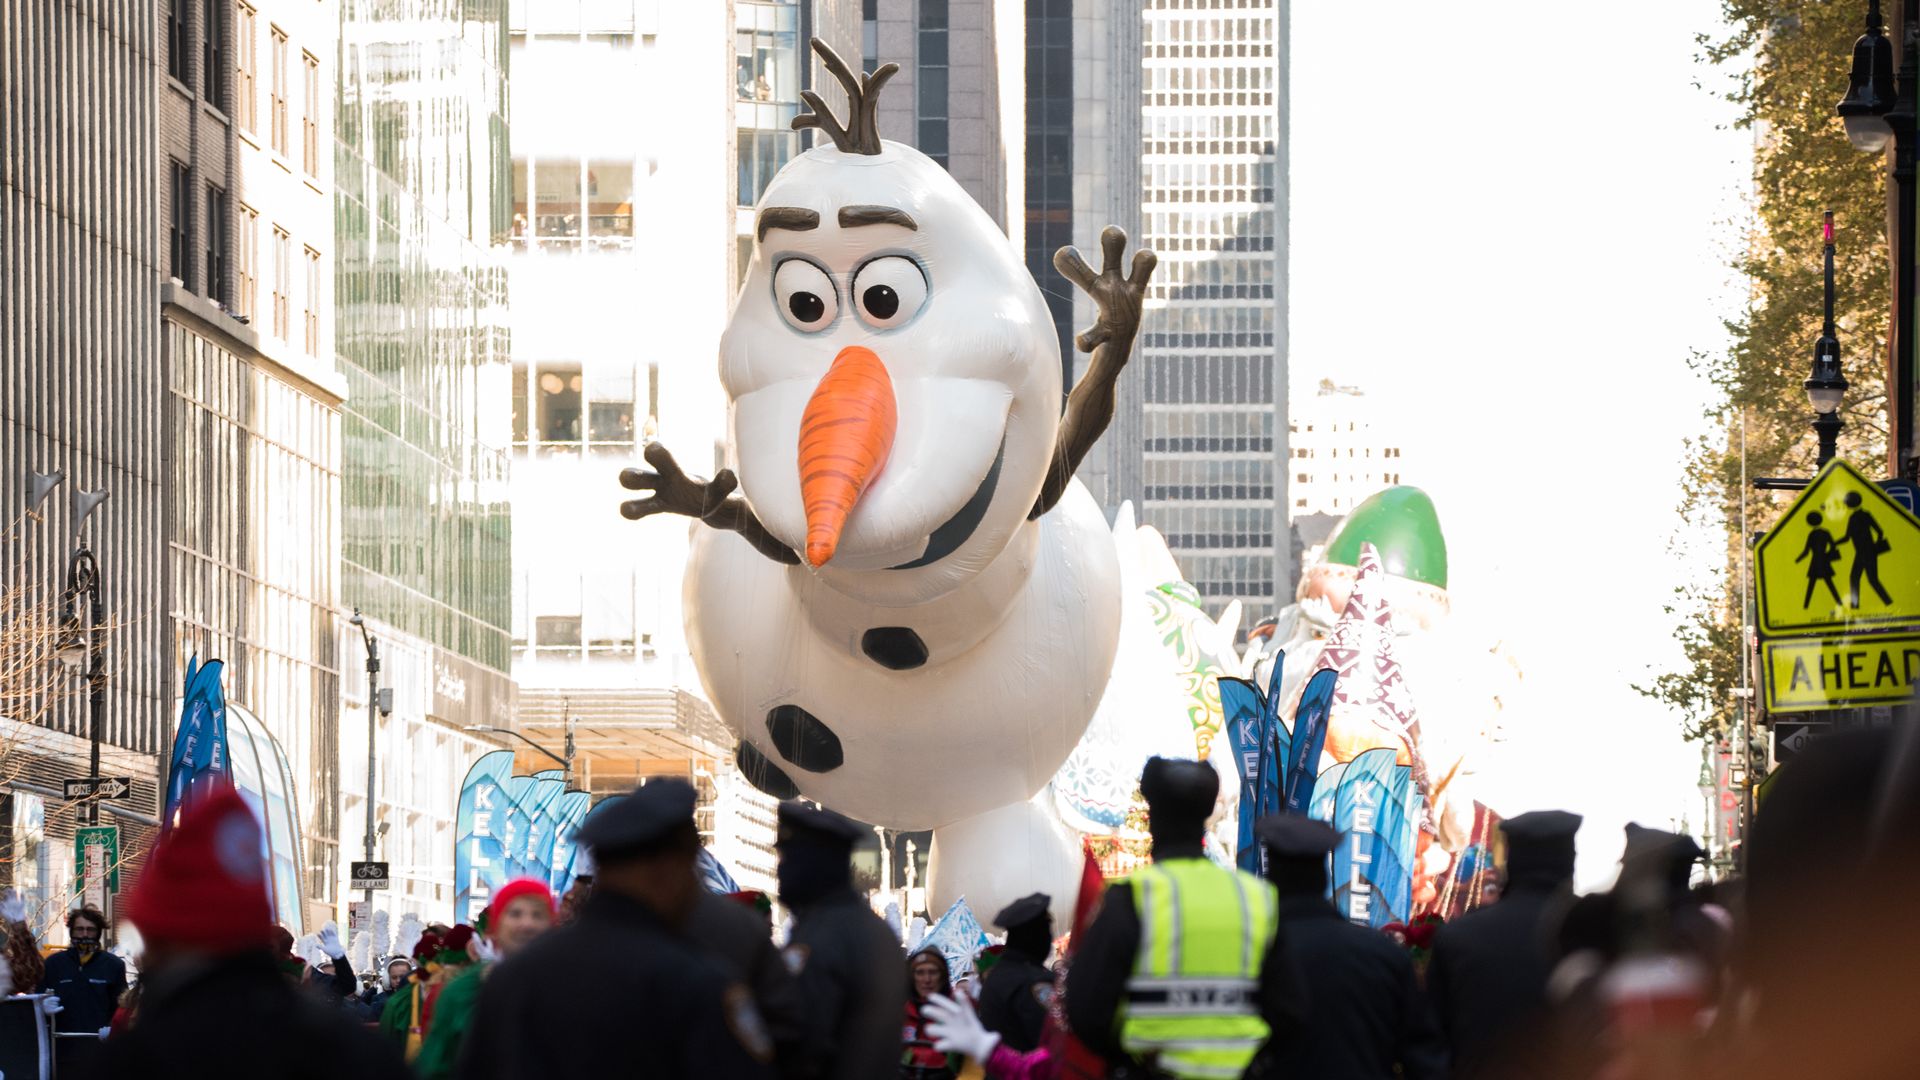 Olaf of Frozen balloon is seen at the 2018 Macy's Thanksgiving Day Parade on November 22, 2018 in New York City. (Photo by Noam Galai/FilmMagic)